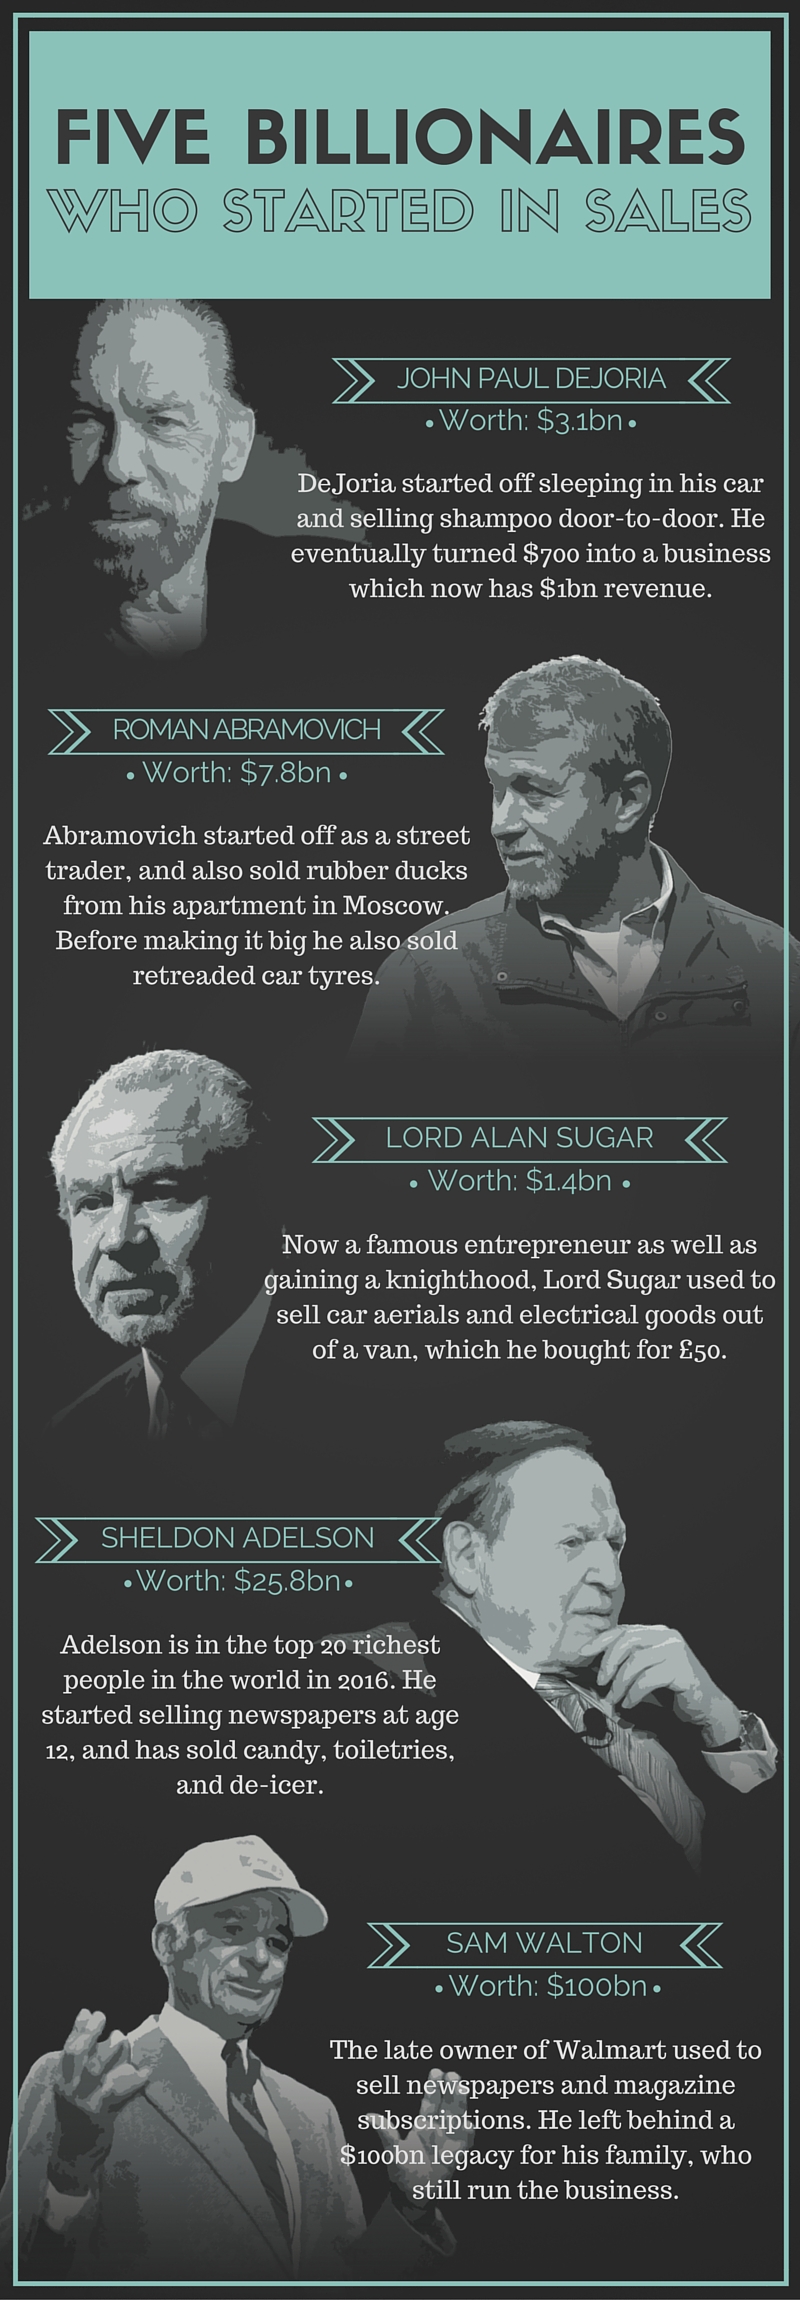 Five Billionaires who Started in Sales Infographic - Pan Atlantic